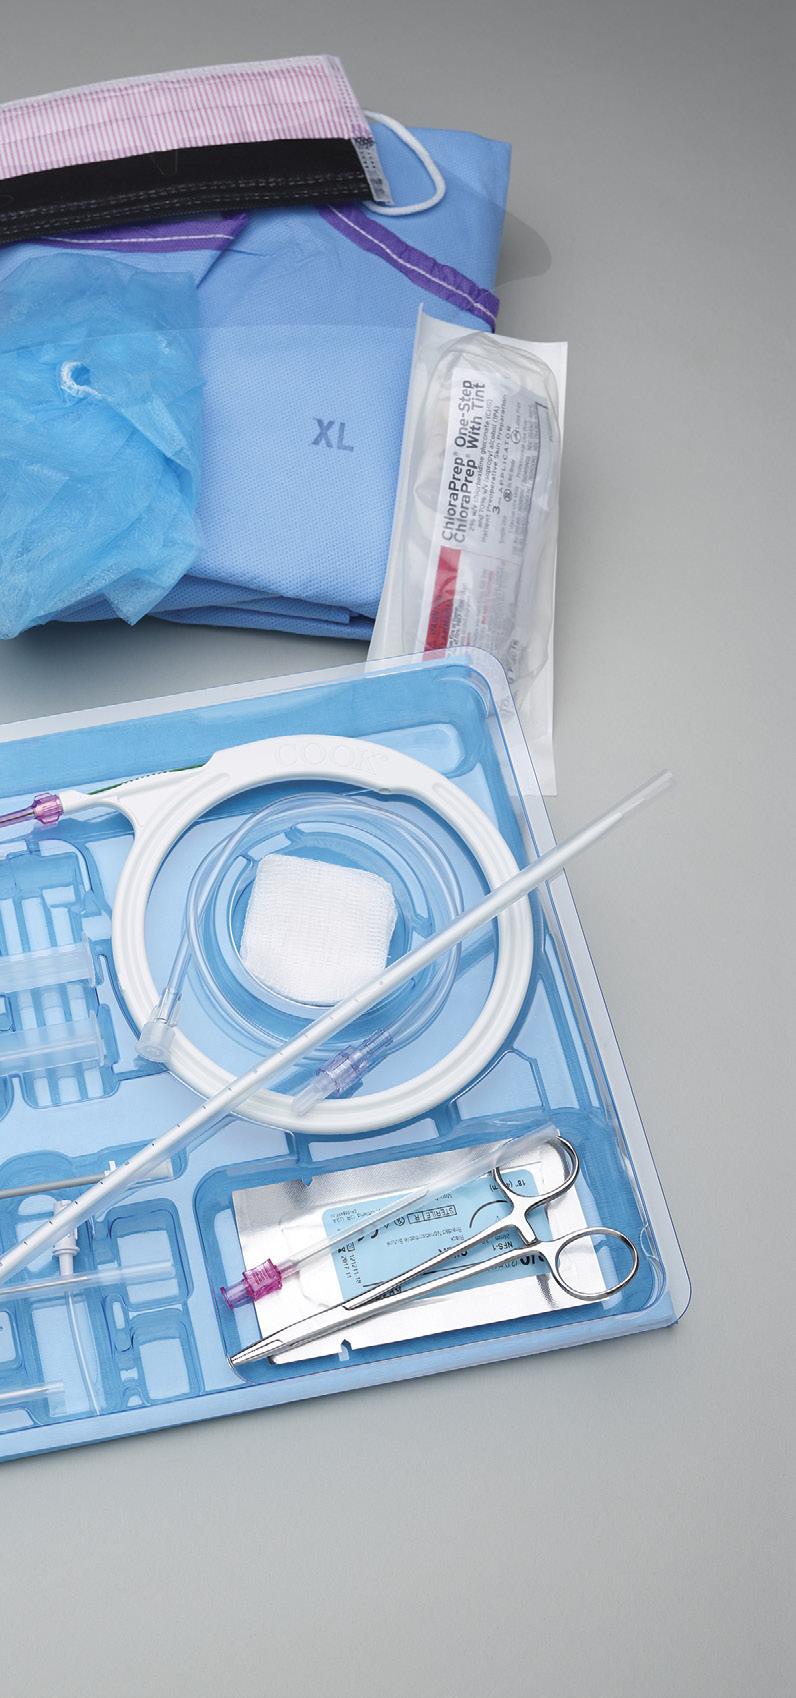 Optional maximal sterile barrier preparation bundle The following optional components are included in the maximal sterile barrier trays and comply with CDC, IHI, and SHEA/IDSA guidelines: Sterile